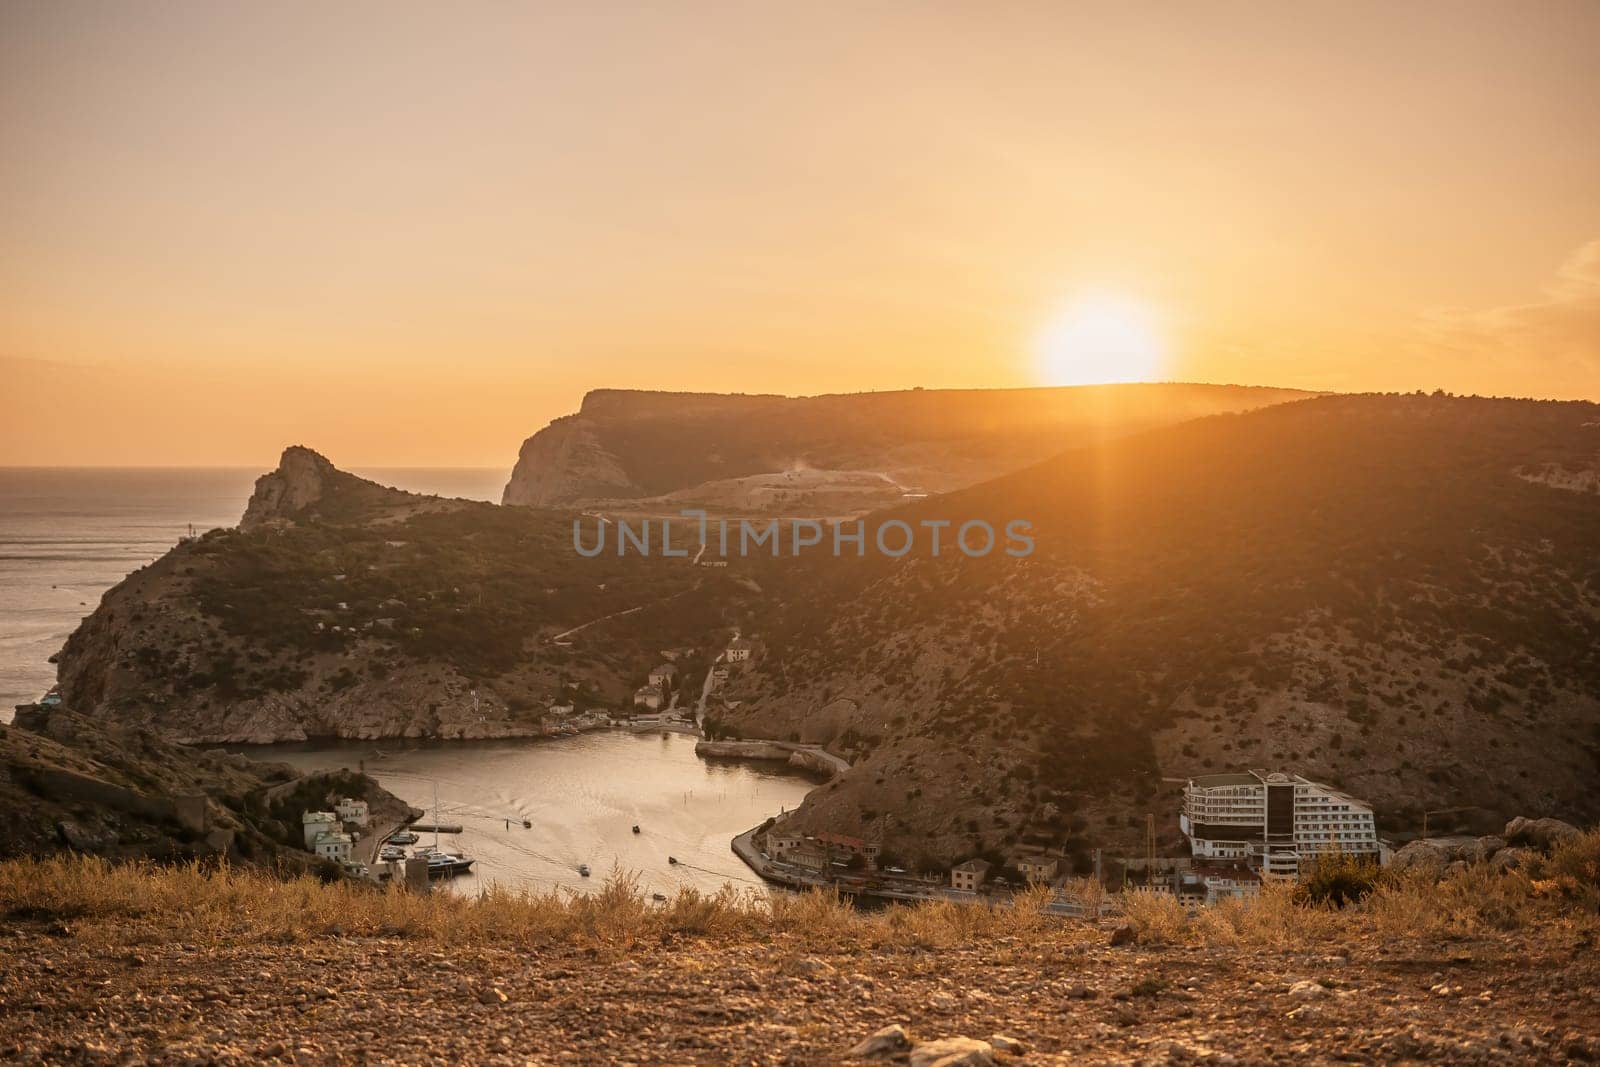 A beautiful sunset over a mountain with a small town in the distance. The sun is setting behind the mountains, casting a warm glow over the landscape. The water in the valley is calm and peaceful. by Matiunina